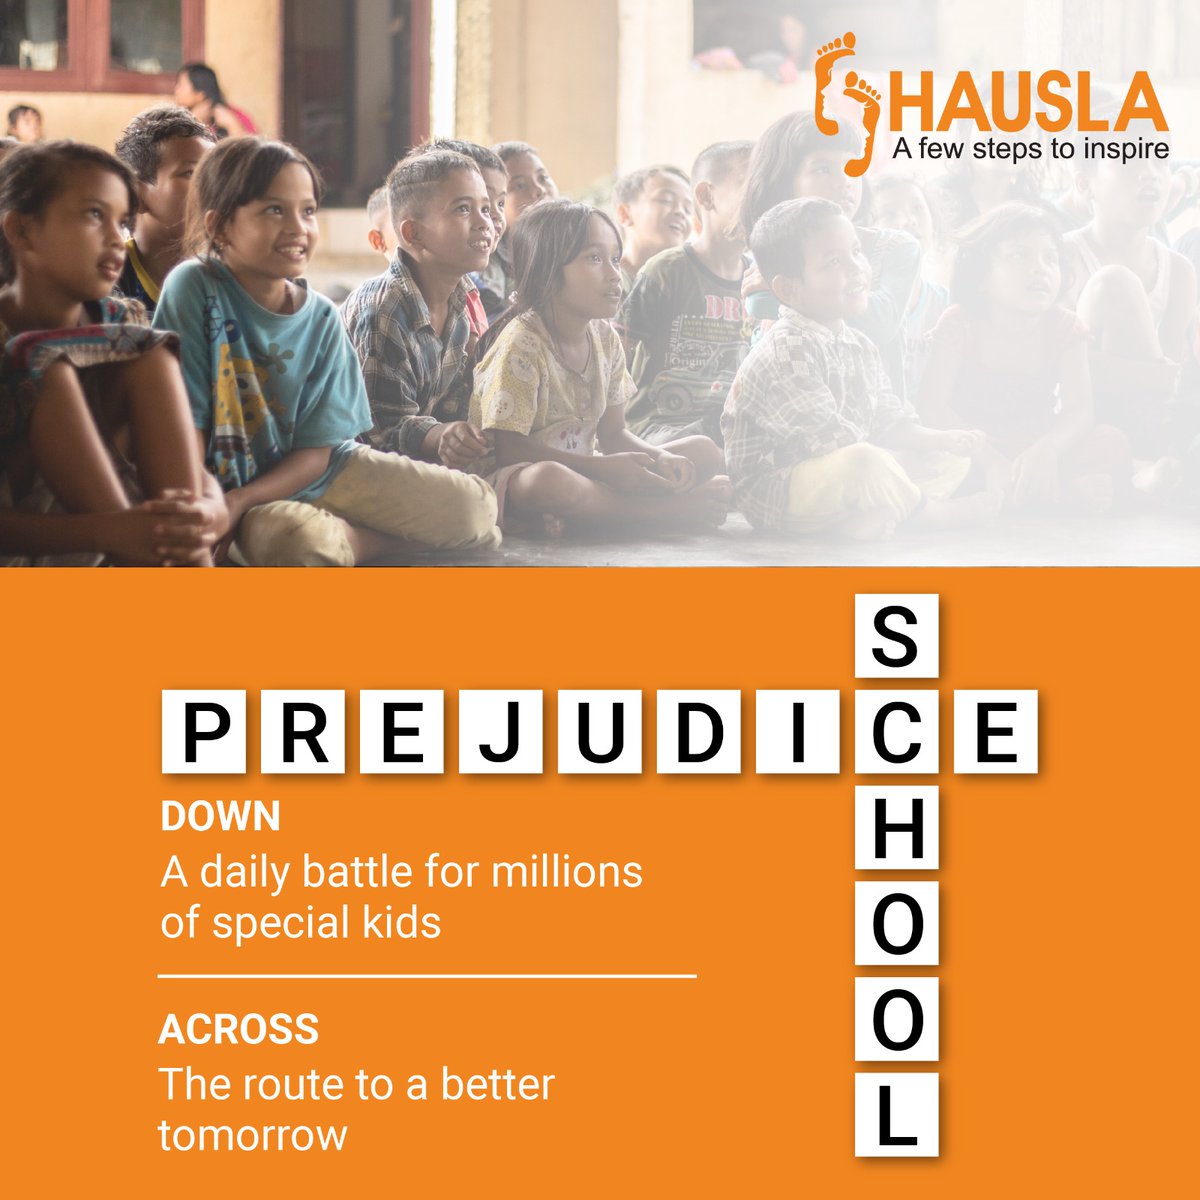 From adaptive learning tools to accessible facilities, we leave no stone unturned to make education accessible and empowering for every student. We celebrate their achievements, big or small, and support them in reaching their full potential.
#hauslafoundation #specialkids